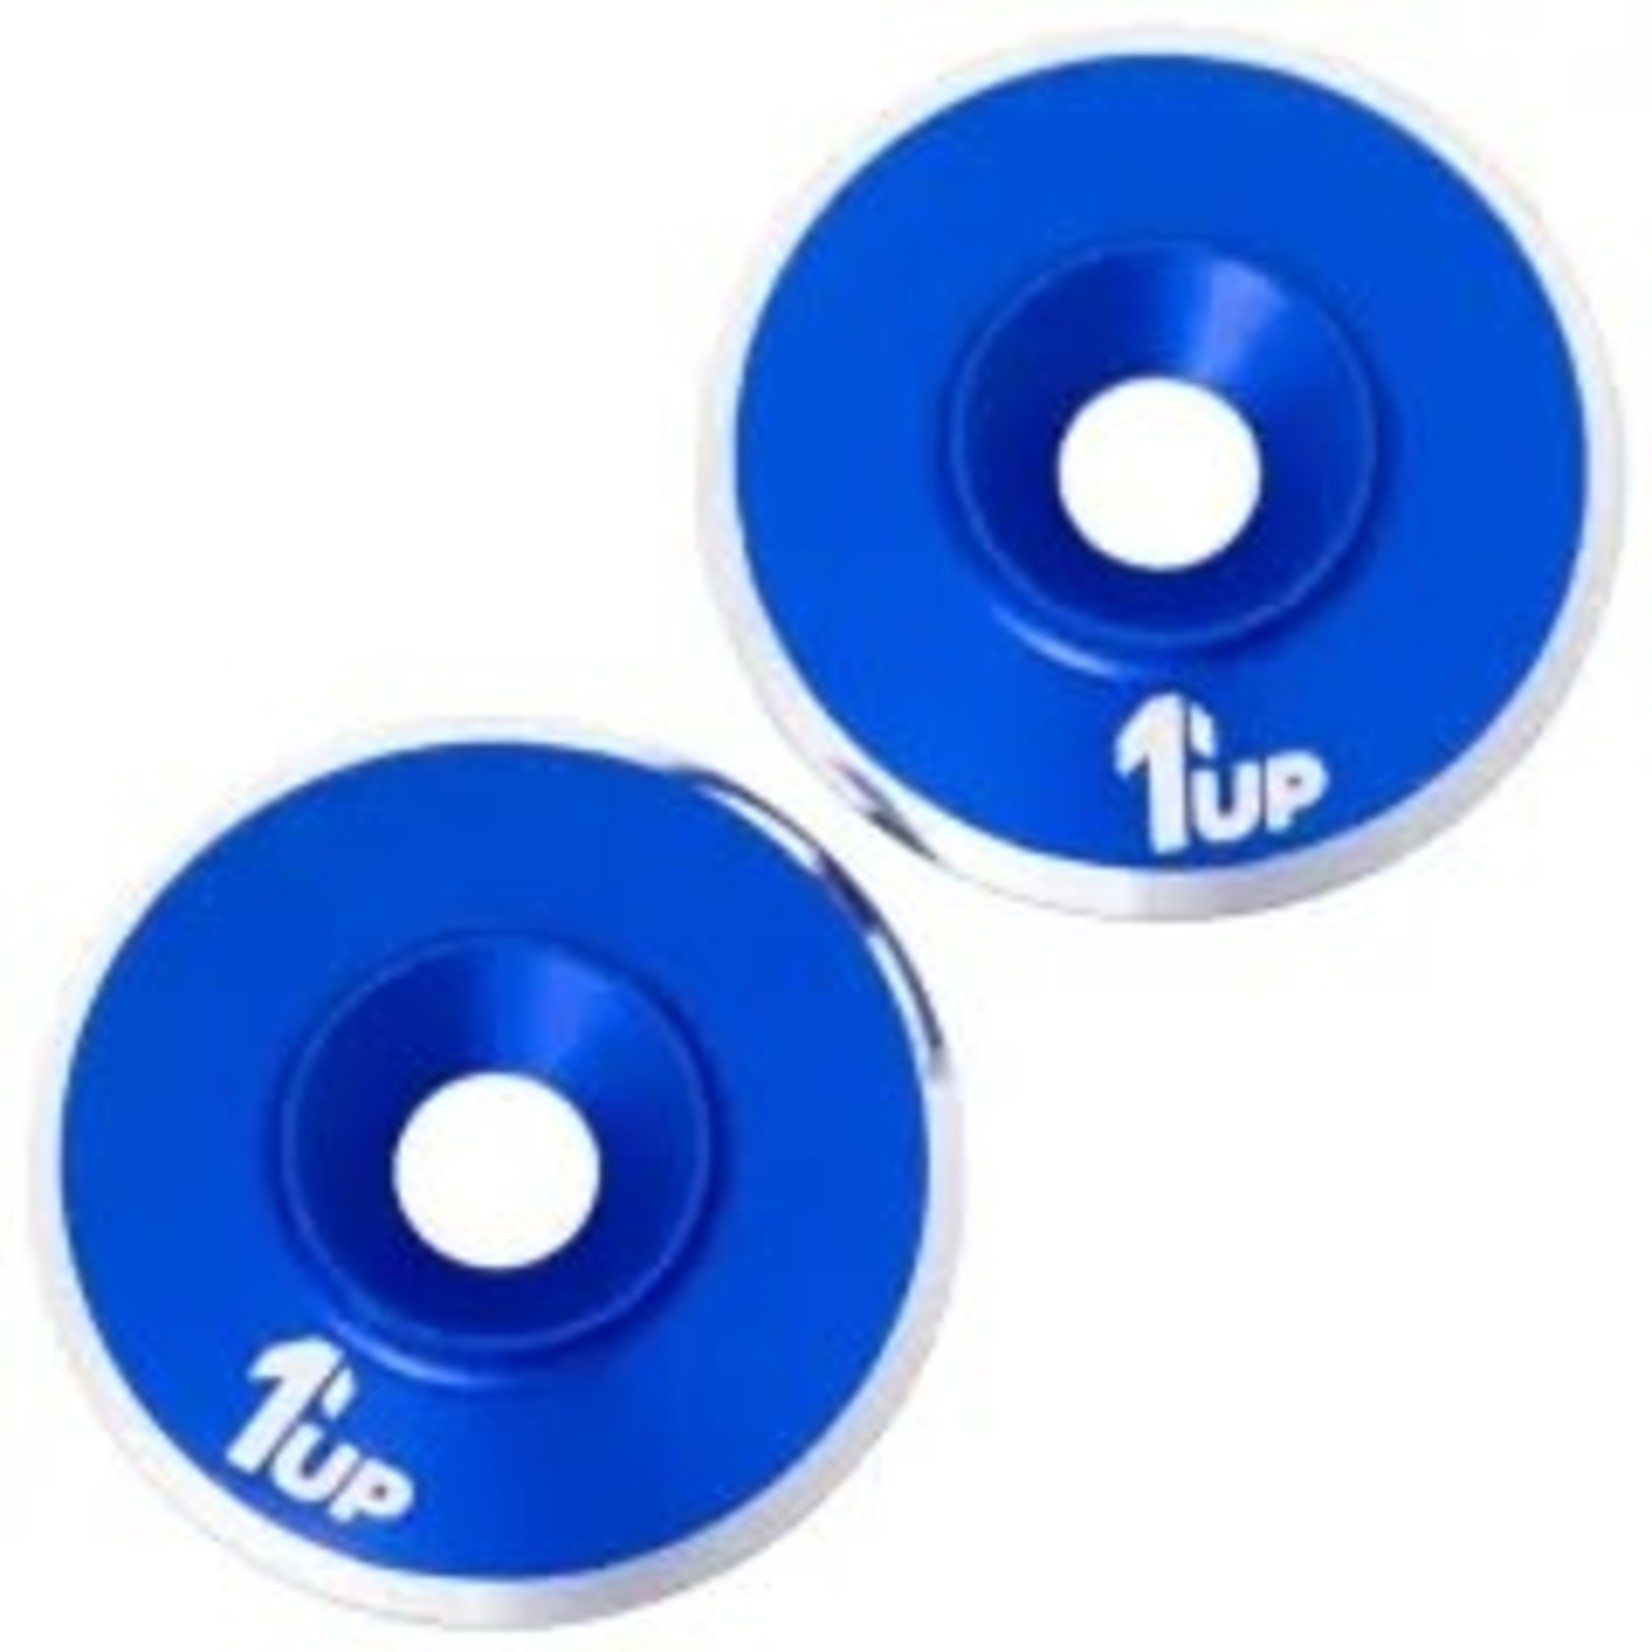 1UP 1UP820121 1Up Racing 7075 LowPro Wing Washers - M3 - 2pcs - Dark Blue Shine